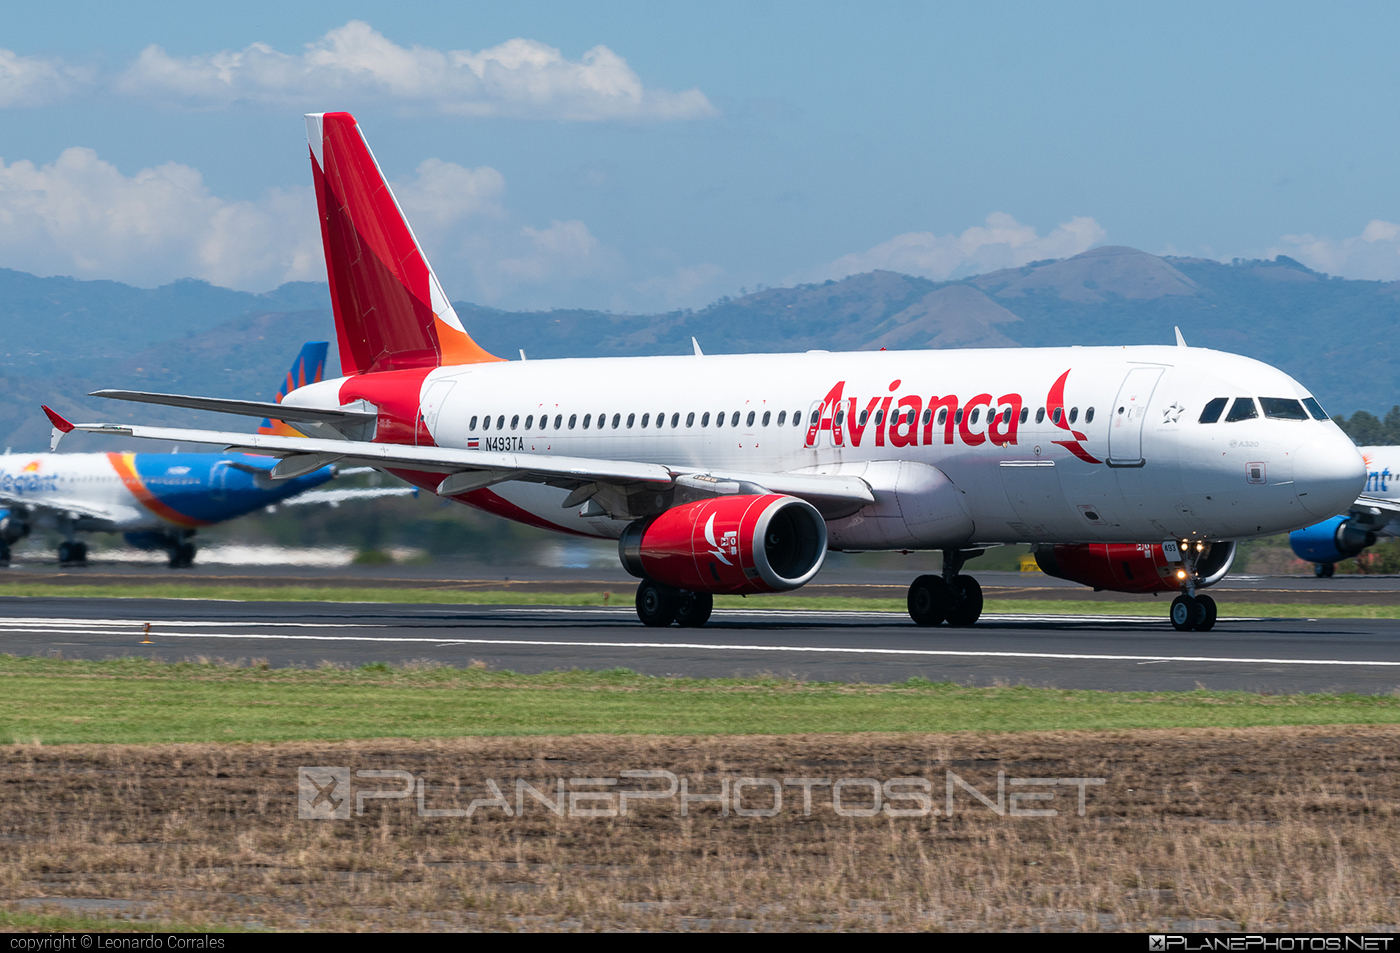 Airbus A320-233 - N493TA operated by Avianca Costa Rica #AviancaCostaRica #a320 #a320family #airbus #airbus320 #avianca